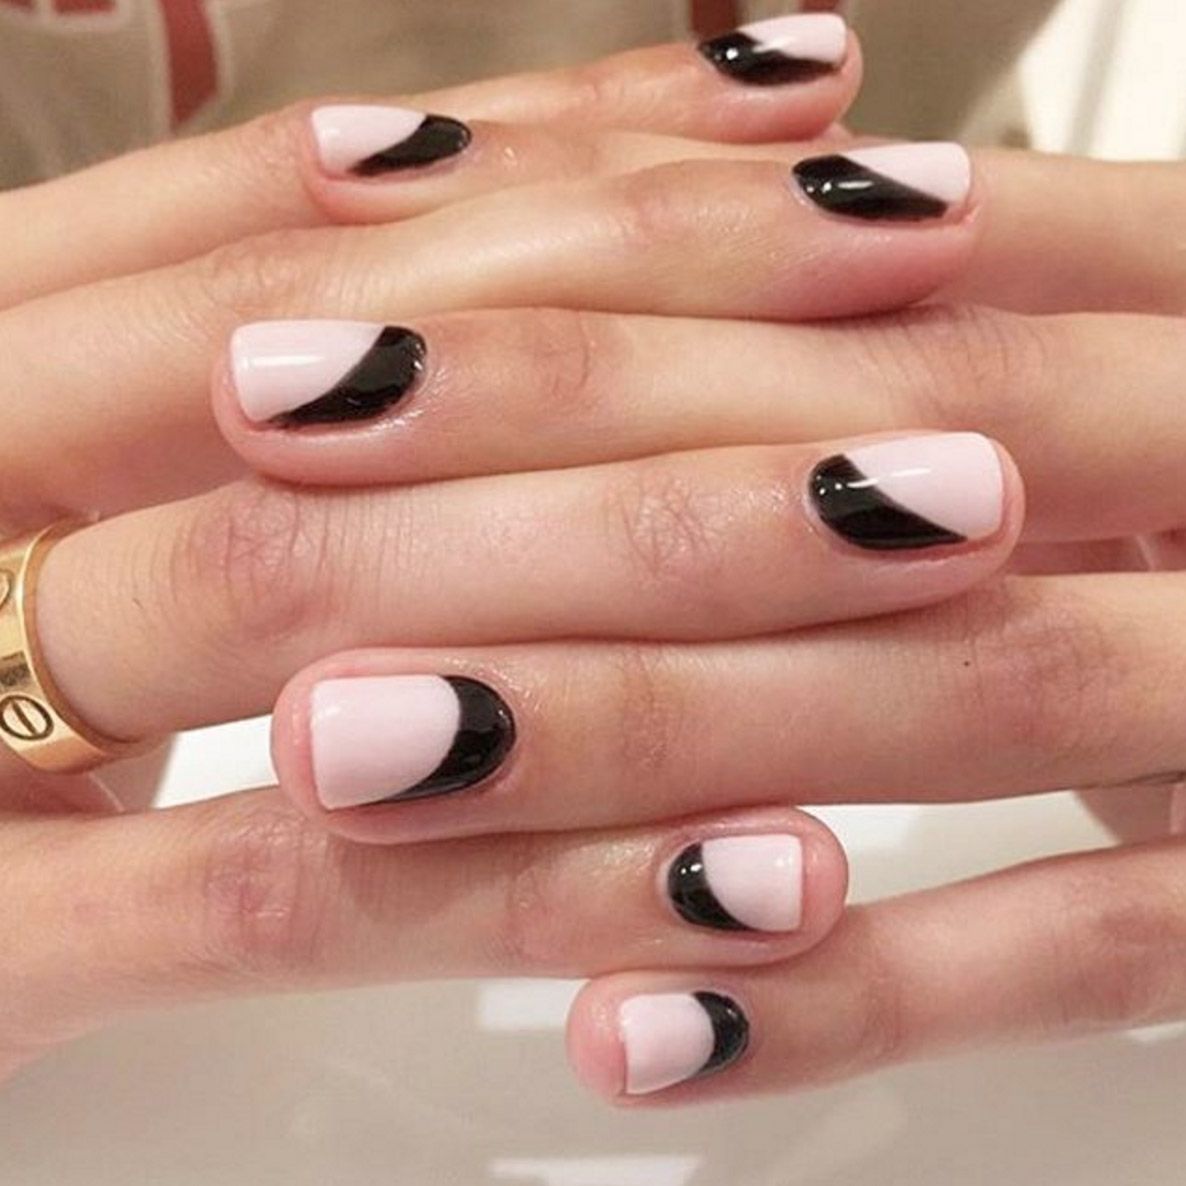 20 Nail Trends You Need to Try in 2017 - Brit + Co